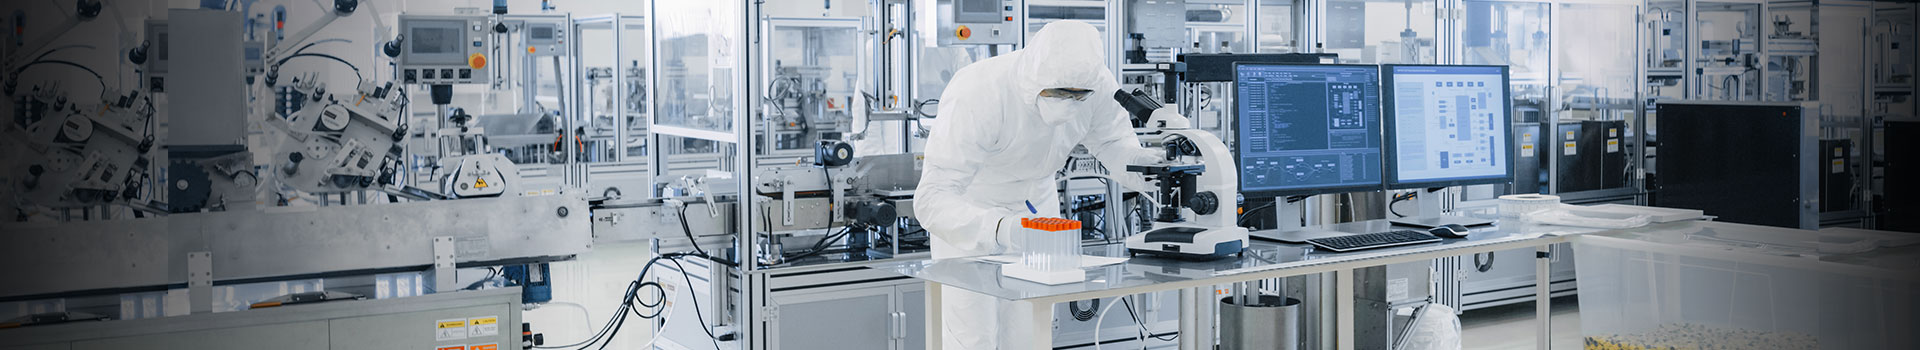 worker in clean room lab